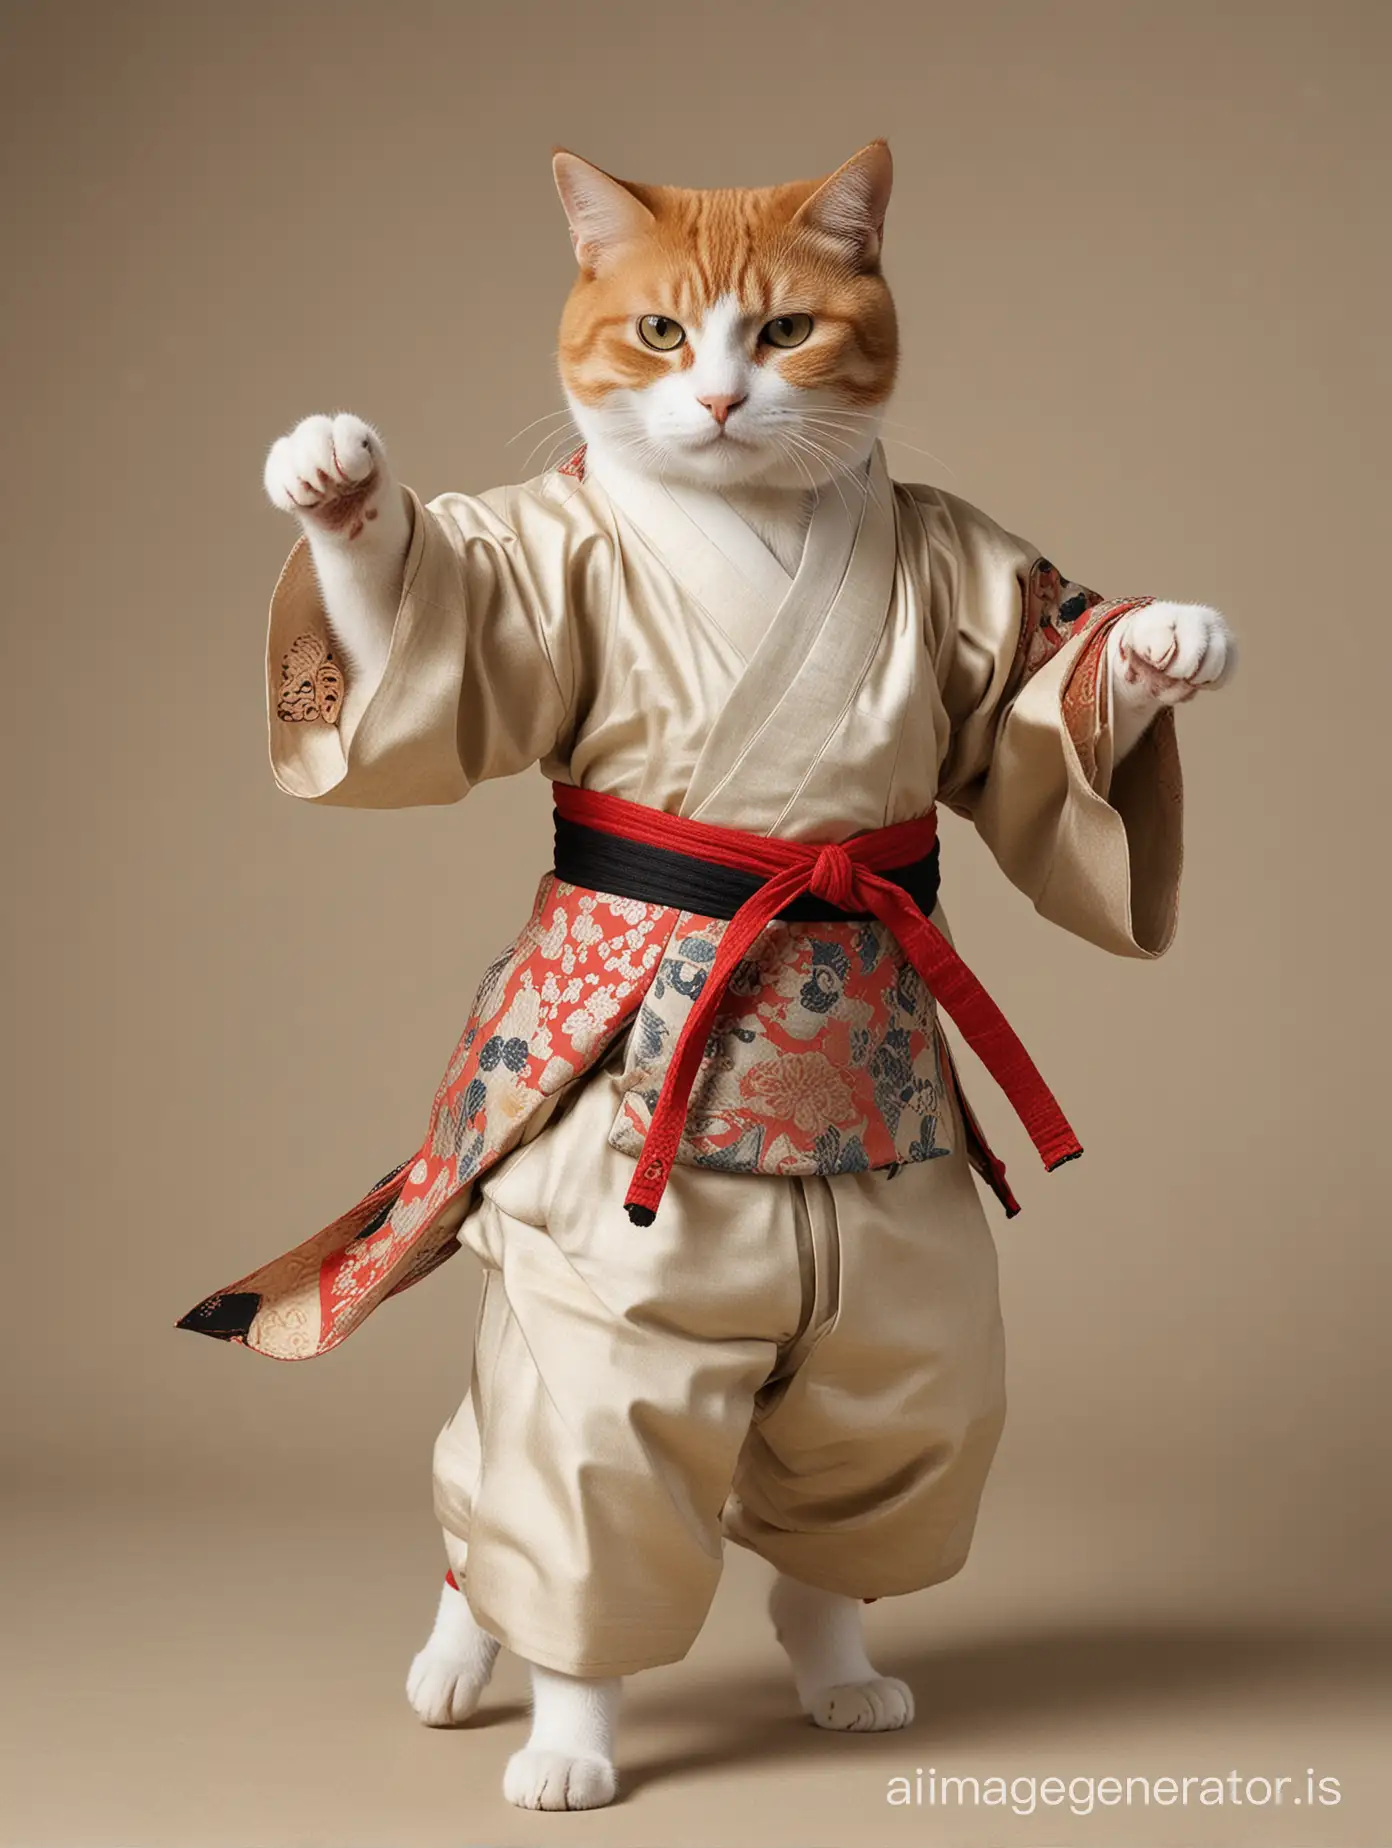 Feline Martial Arts Cat in Motion with Traditional Japanese Attire | AI ...